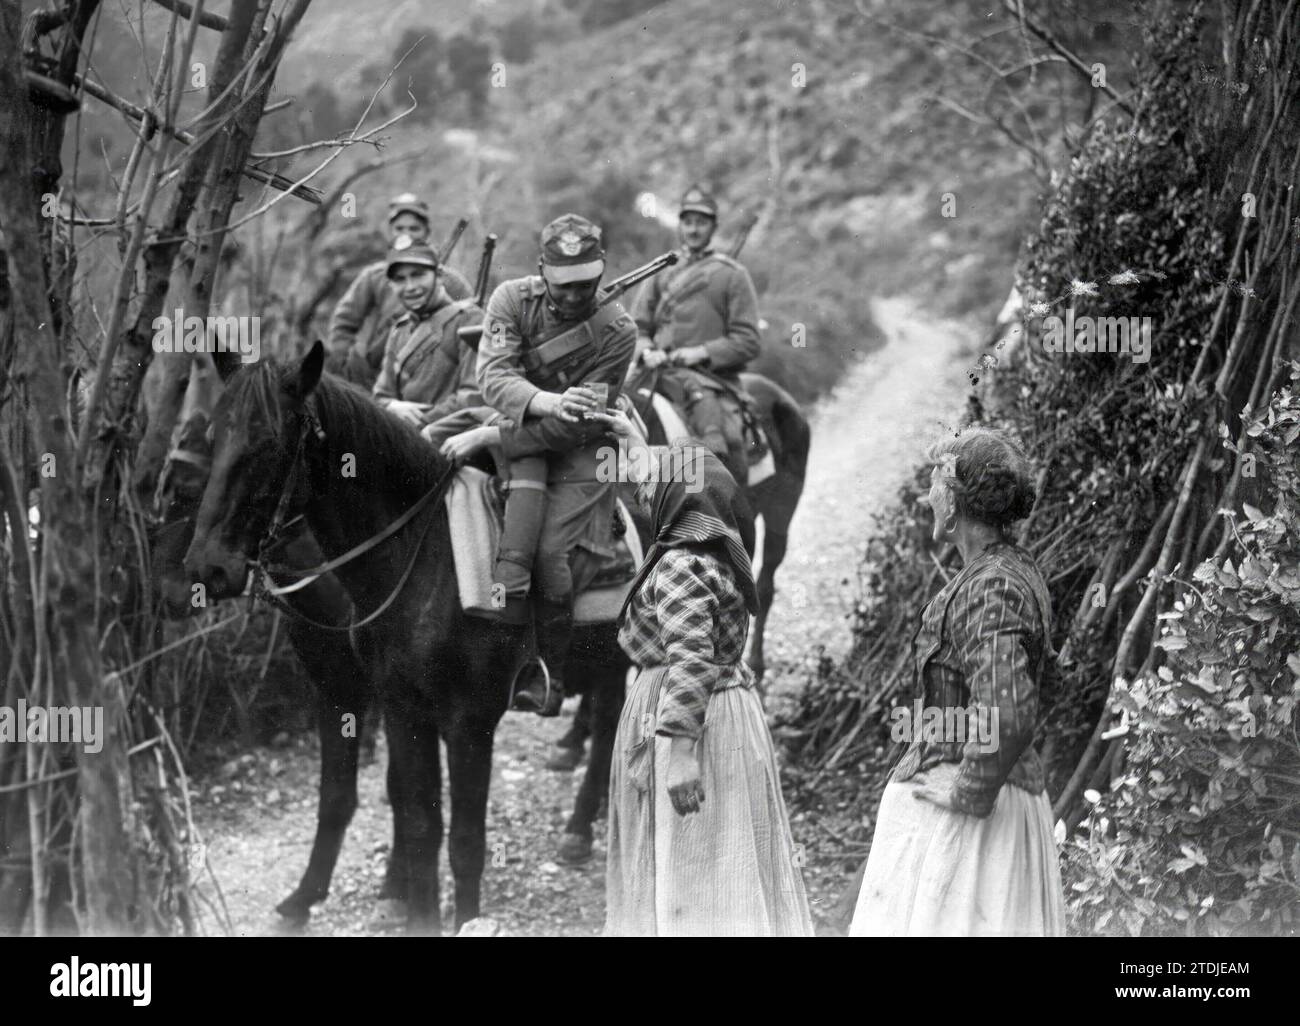 12/31/1915. The Italians in Campaign. Women of an Alpine village watering the soldiers of an Italian cavalry patrol. Credit: Album / Archivo ABC Stock Photo